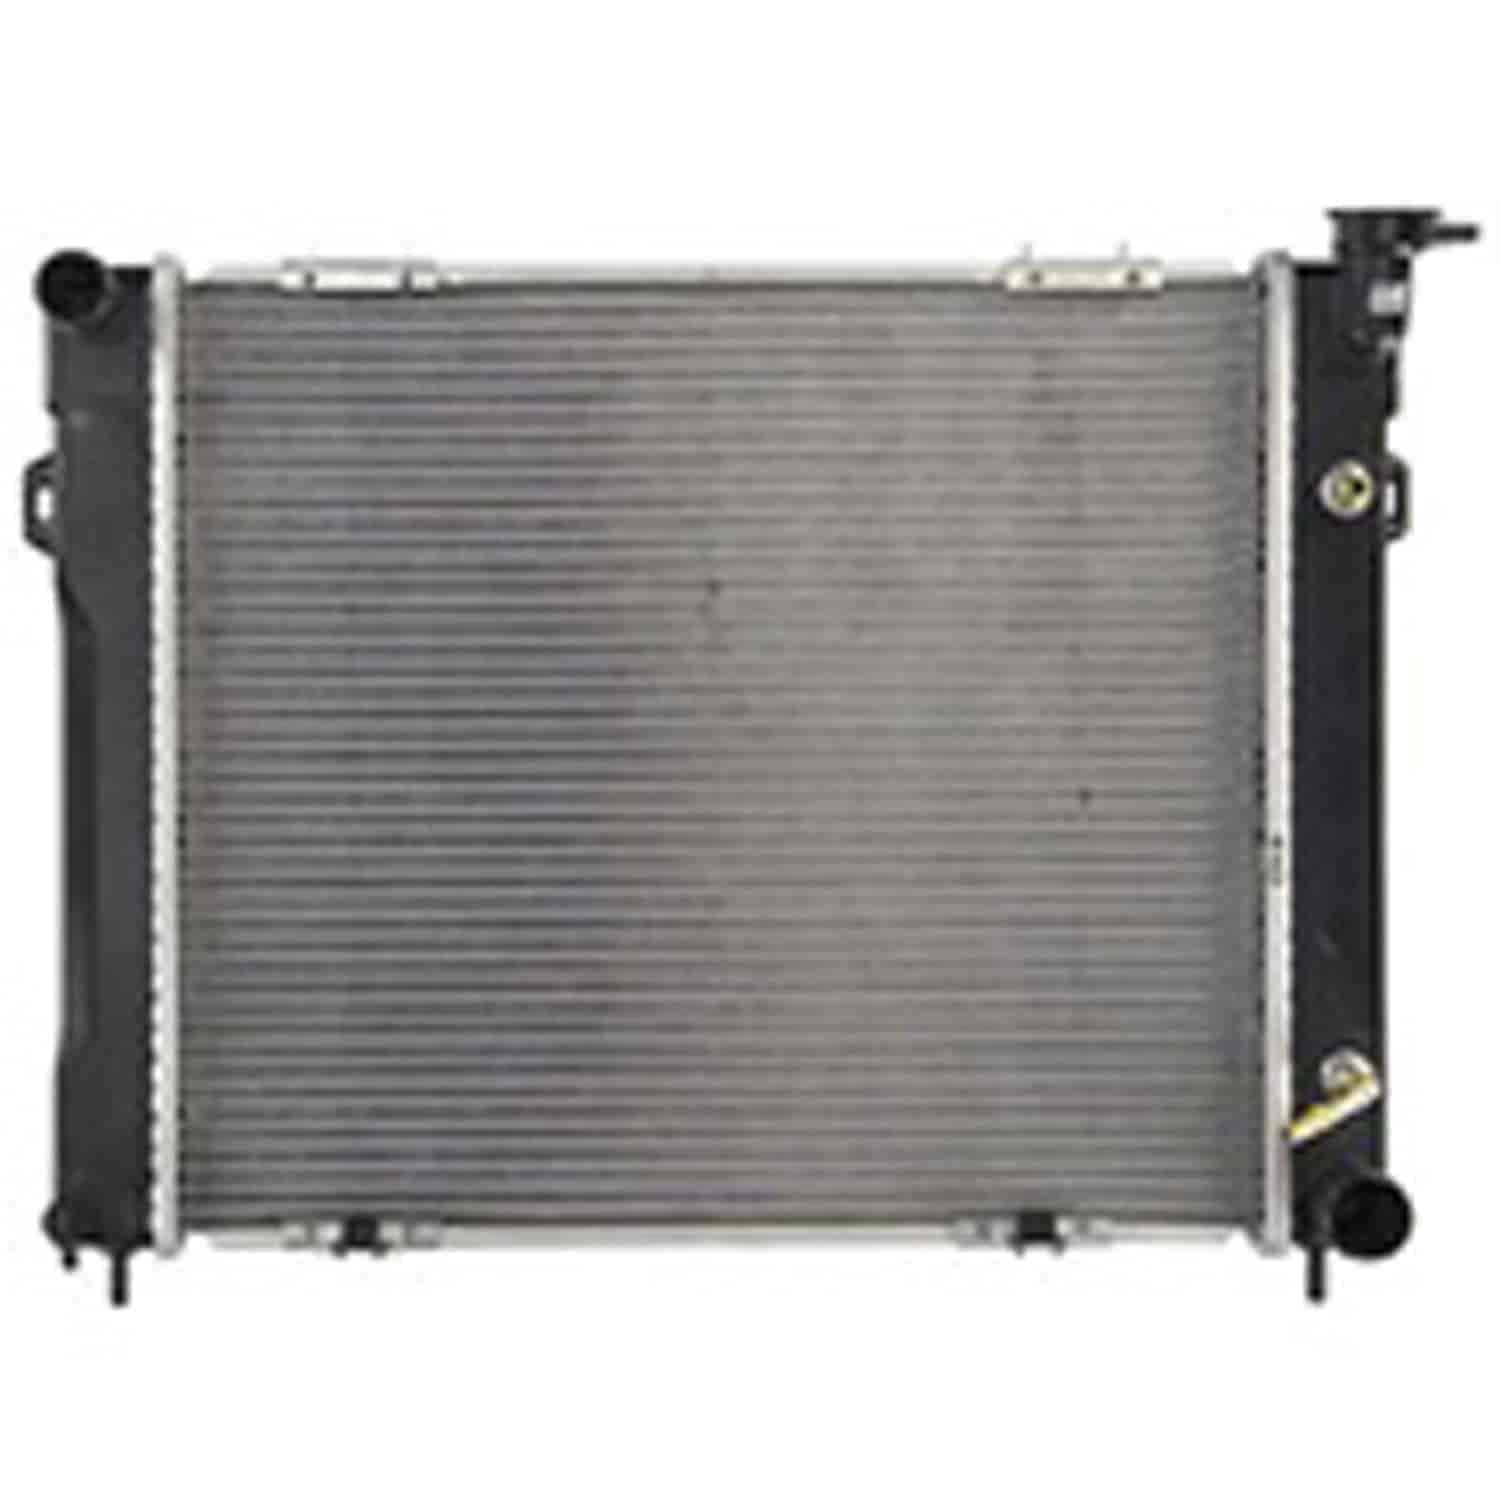 This 1 row radiator from Omix-ADA fits 95-97 Jeep Grand Cherokee ZJ wit a V8 engine.